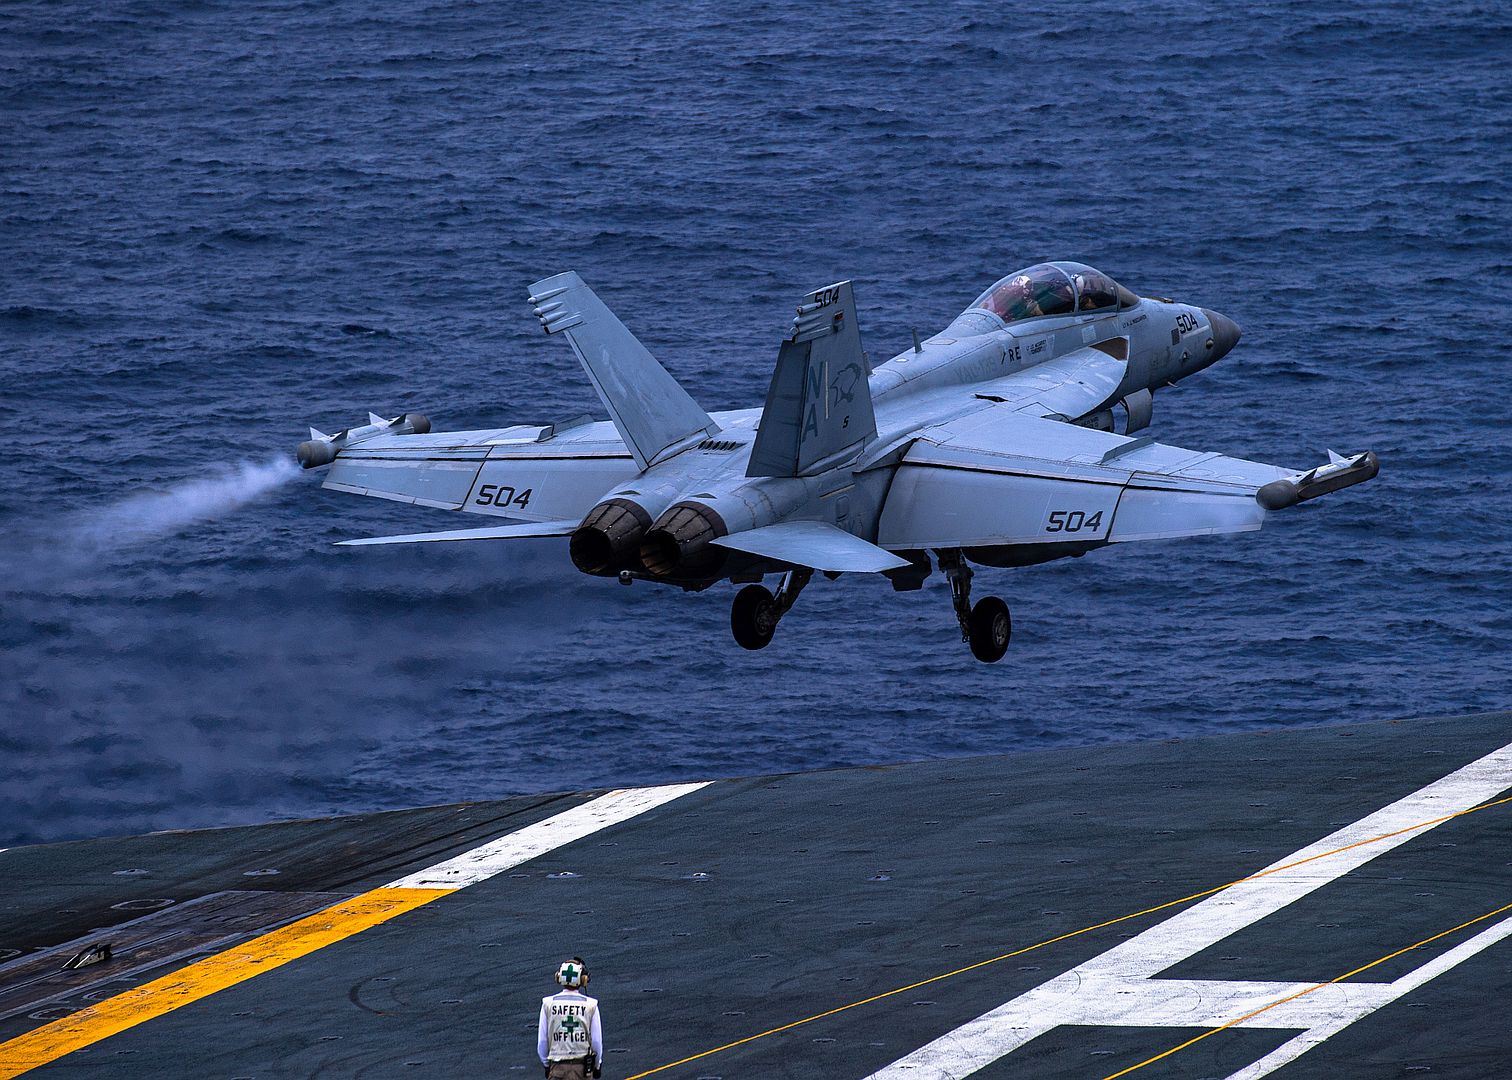  139 Launches From The Flight Deck Of The Aircraft Carrier USS Nimitz